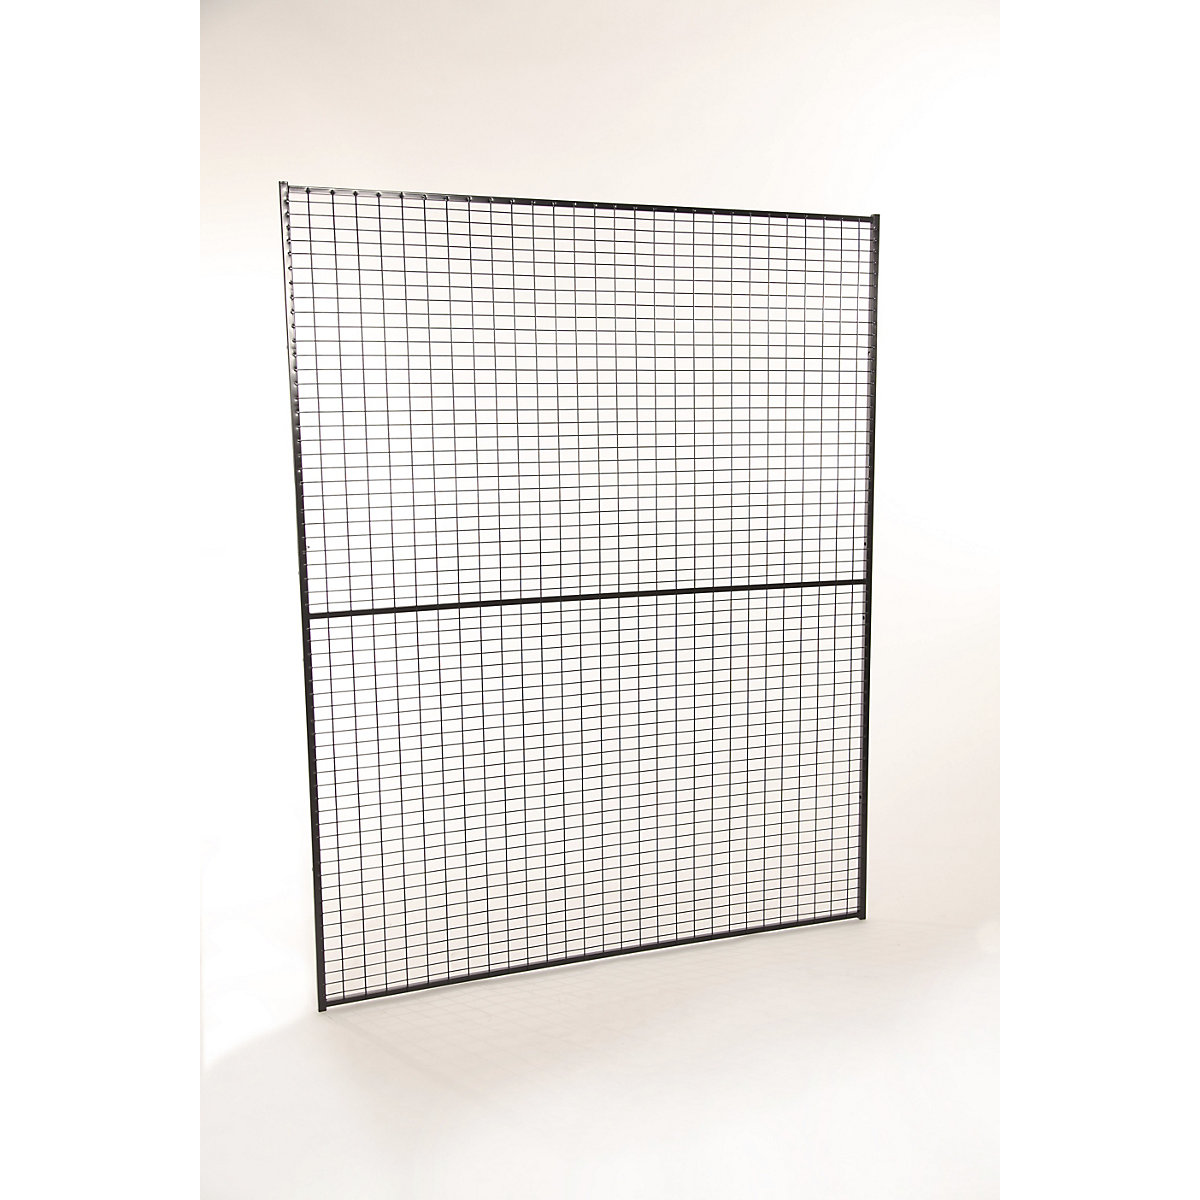 X-GUARD LITE machine protective fencing, wall section – Axelent, height 2200 mm, width 1100 mm-5